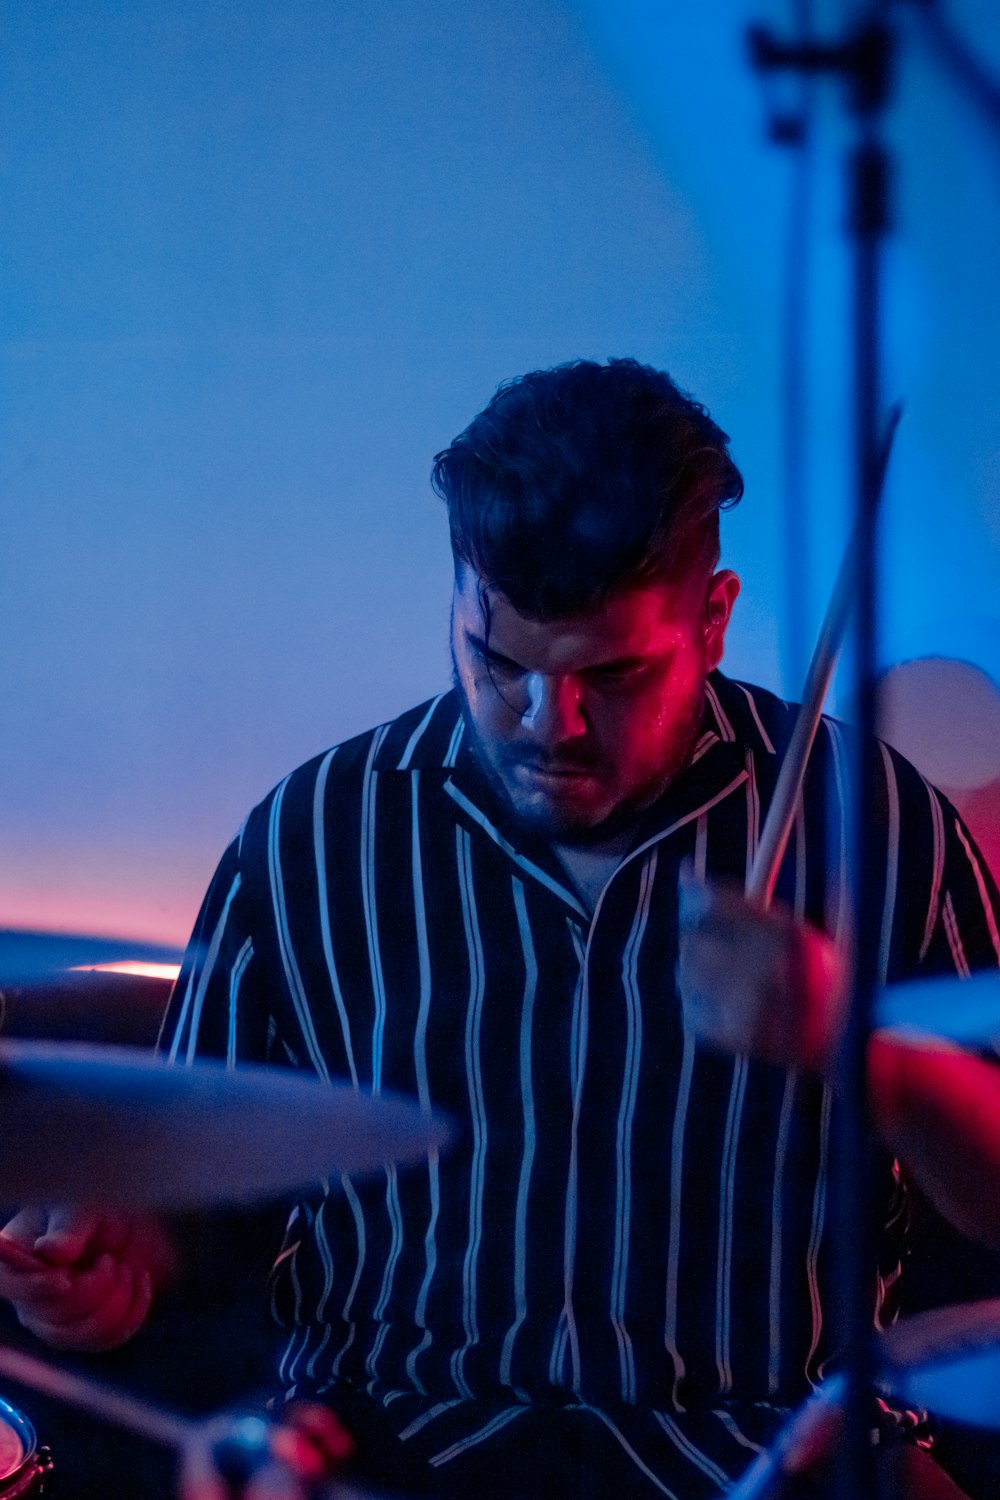 a man playing drums in a dark room